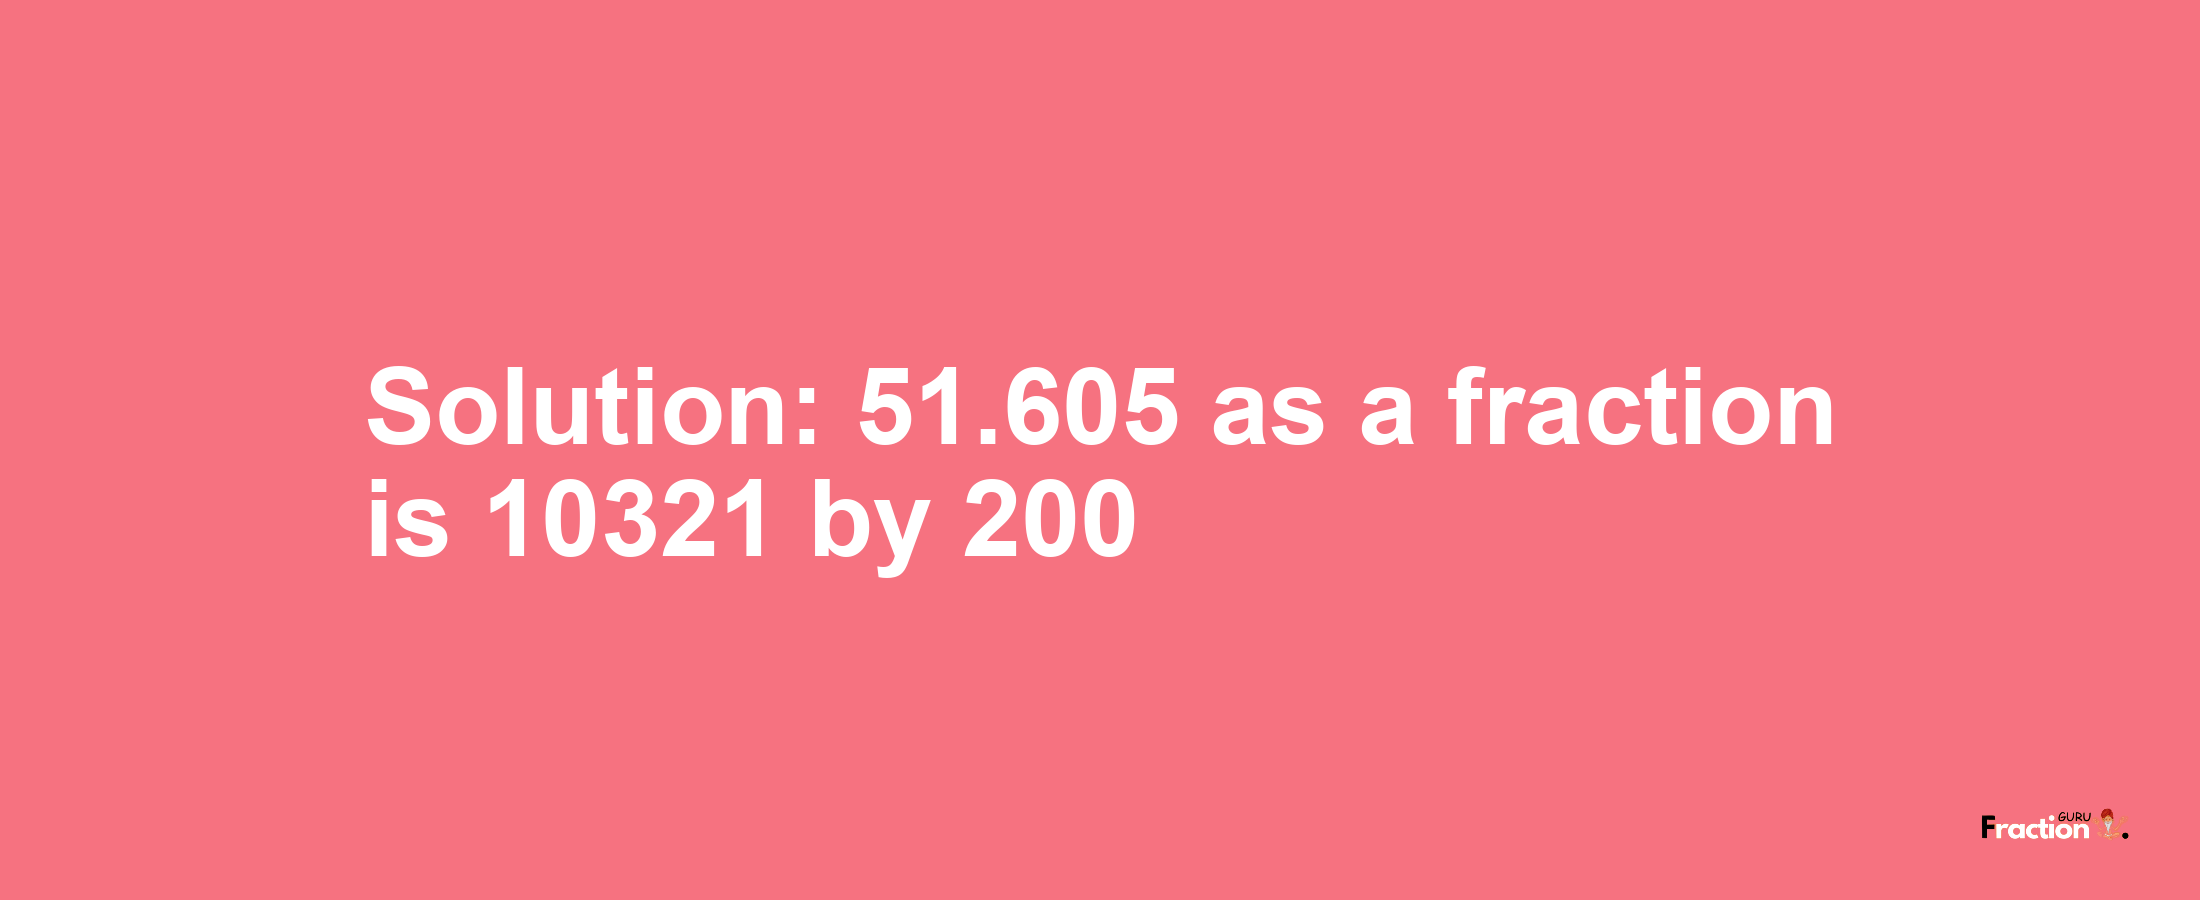 Solution:51.605 as a fraction is 10321/200